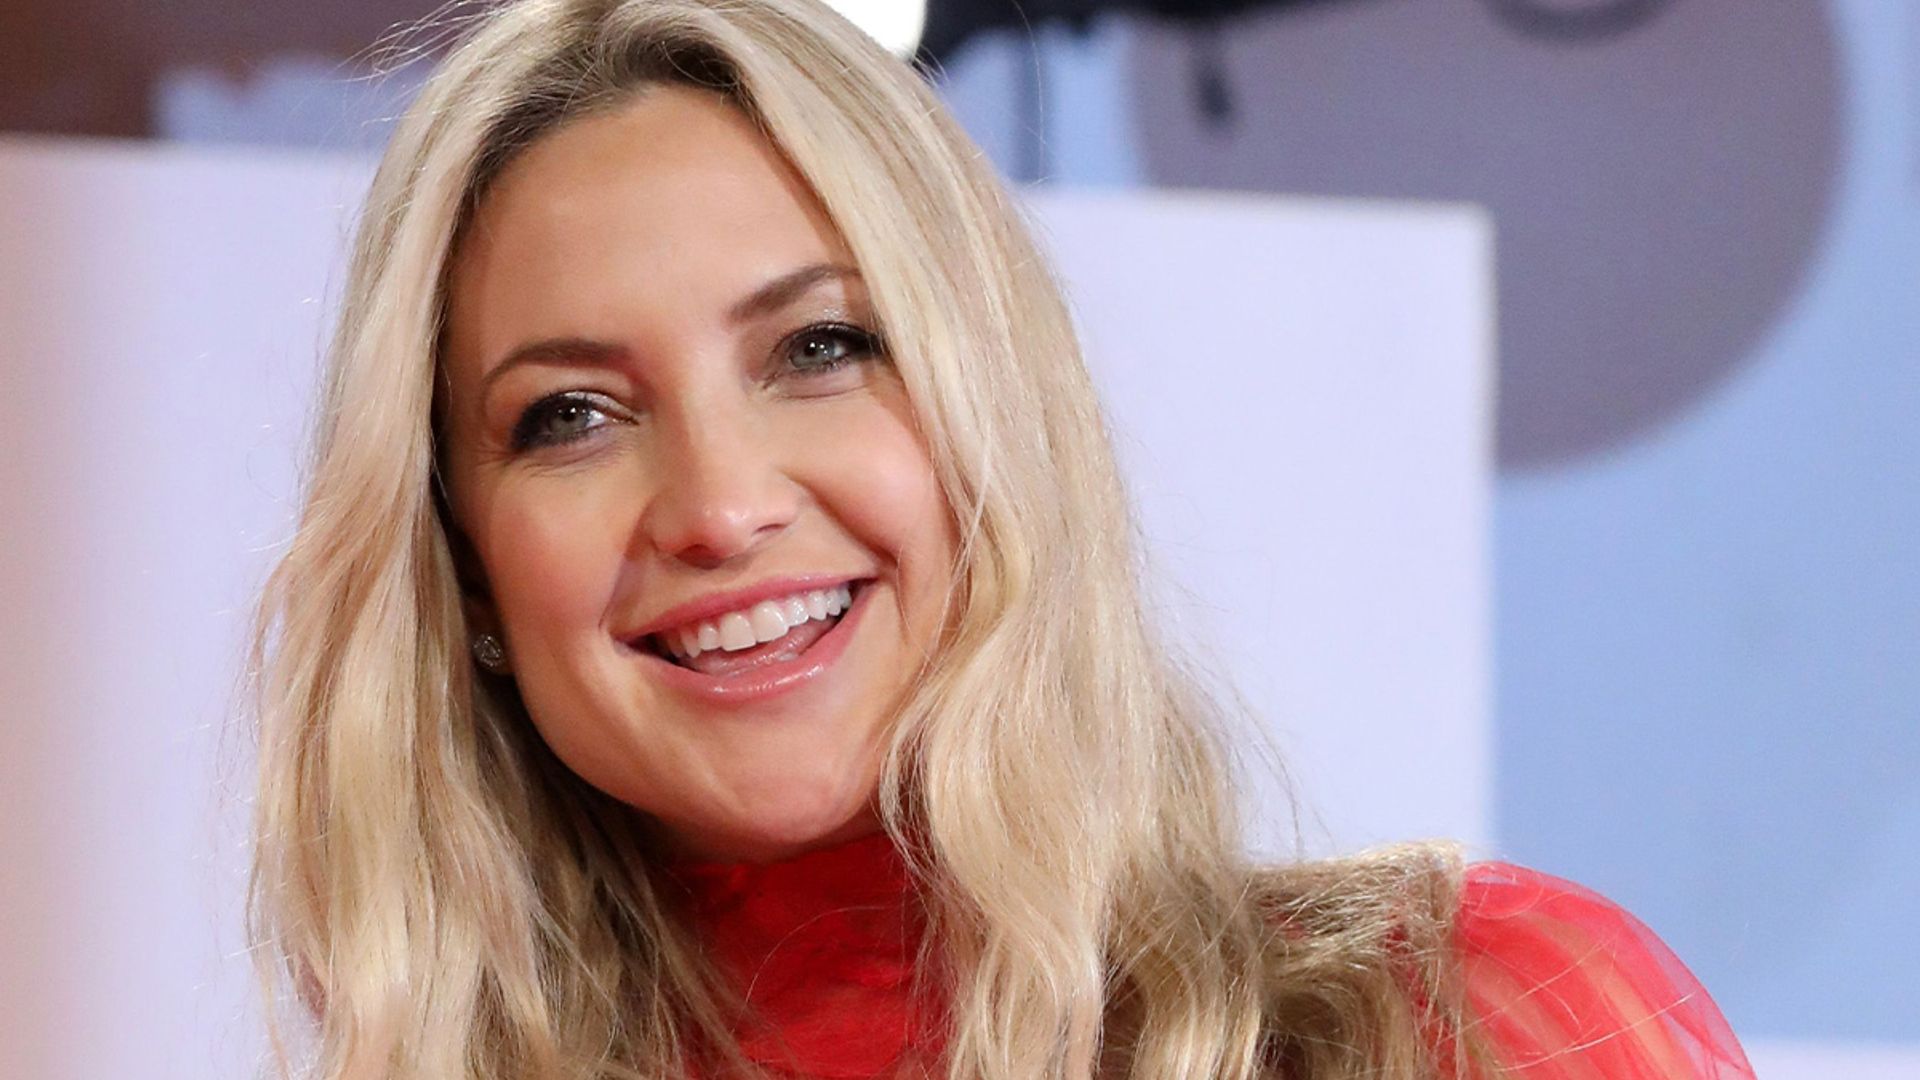 Kate Hudson shares adorable workout video with mini-me daughter - watch